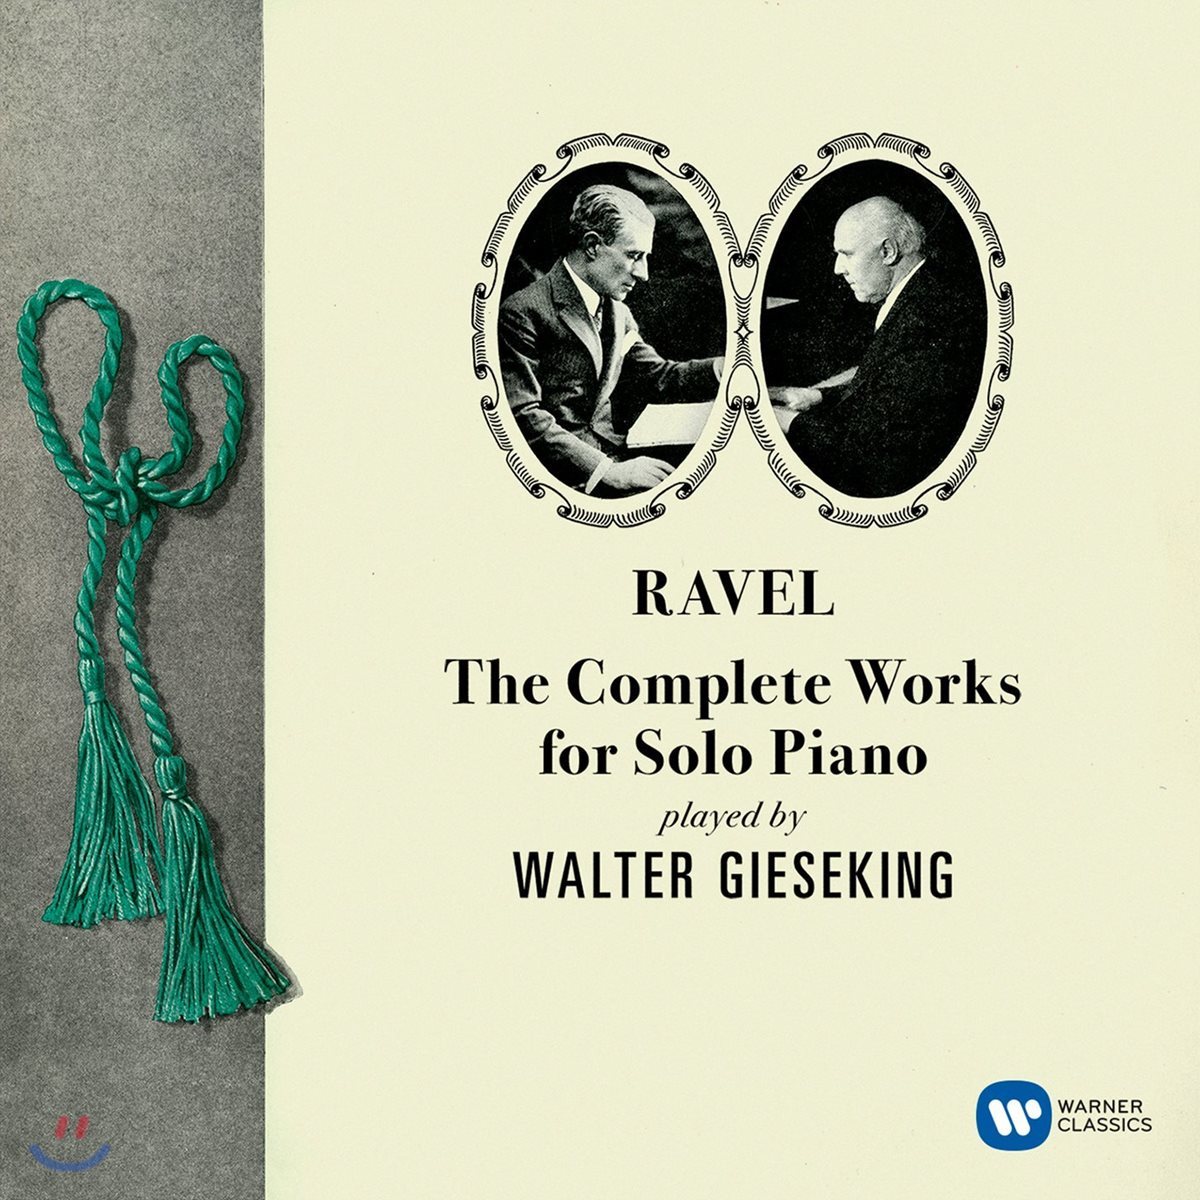 Walter Gieseking 라벨: 피아노 솔로 작품 전집 - 발터 기제킹 (Ravel: The Complete Works for Solo Piano)